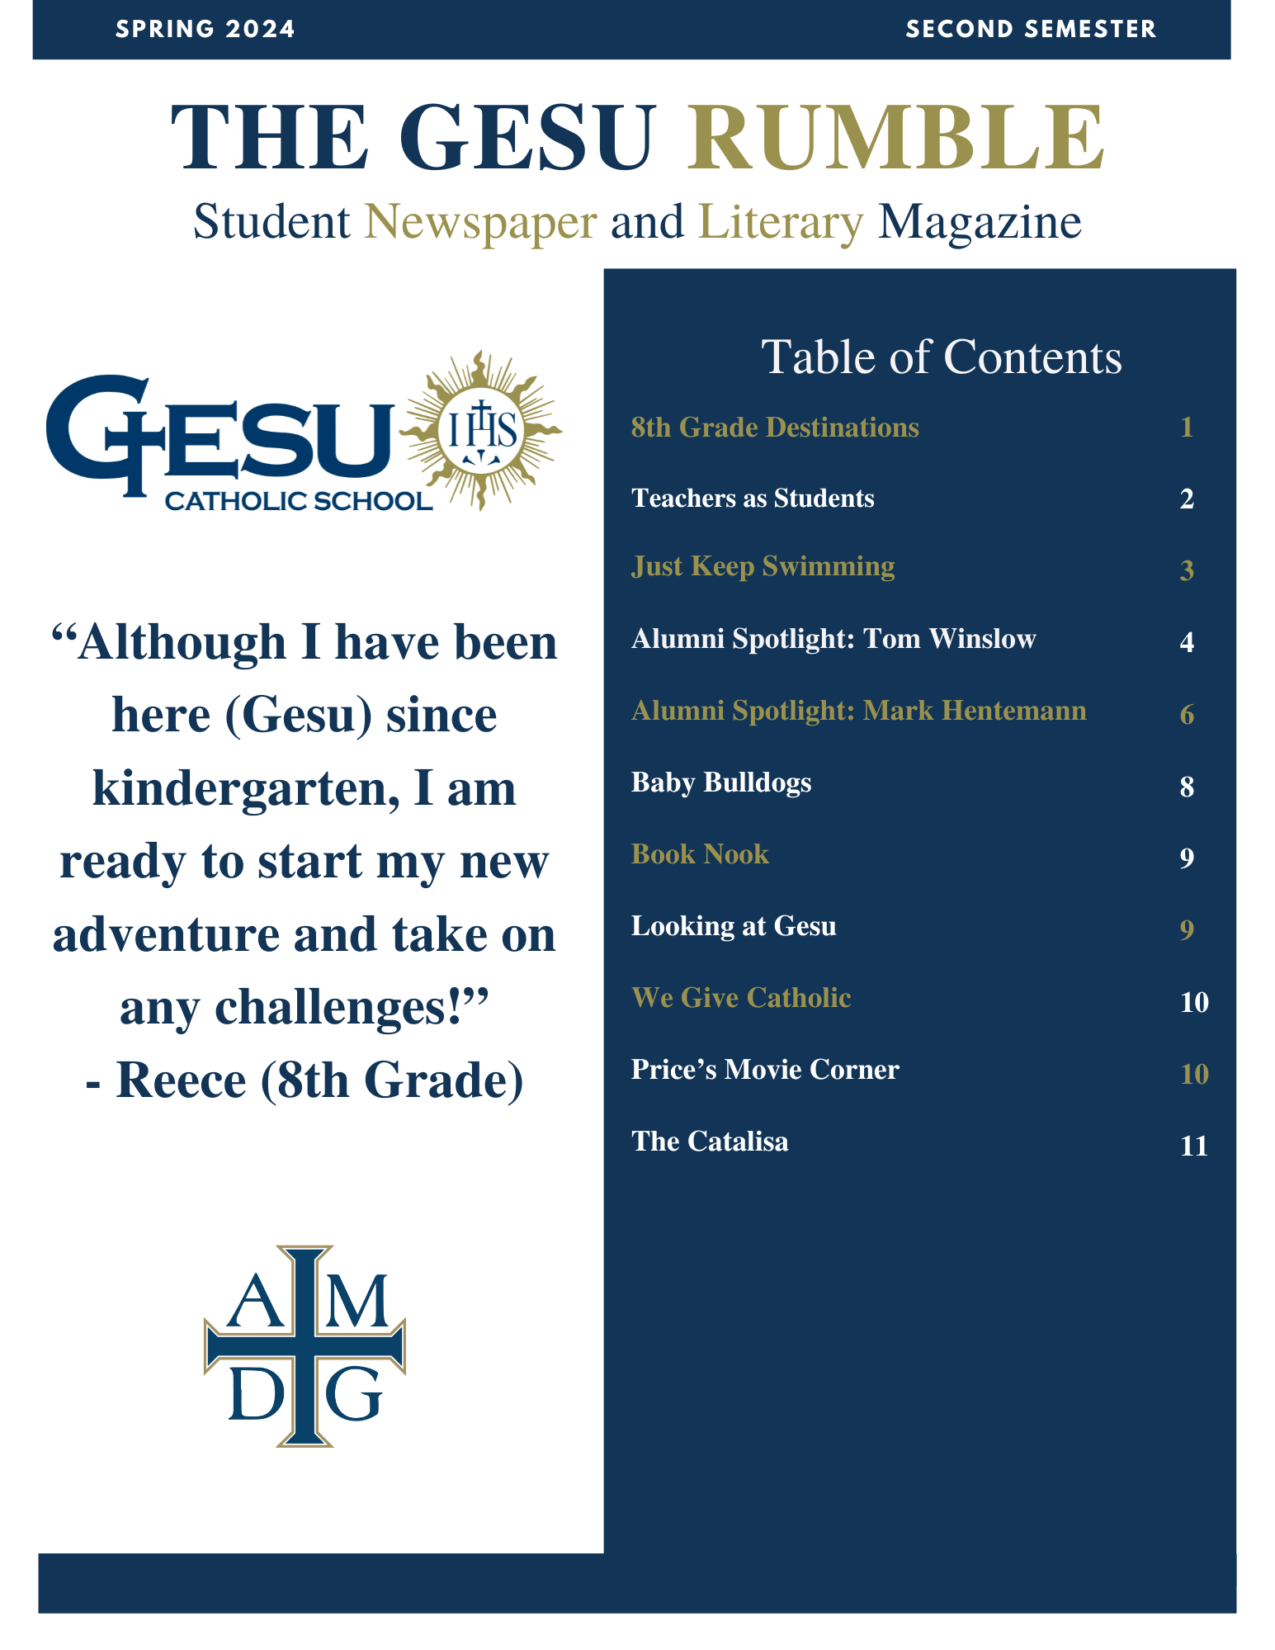 Gesu Rumble Spring Edition 2024 Front Cover